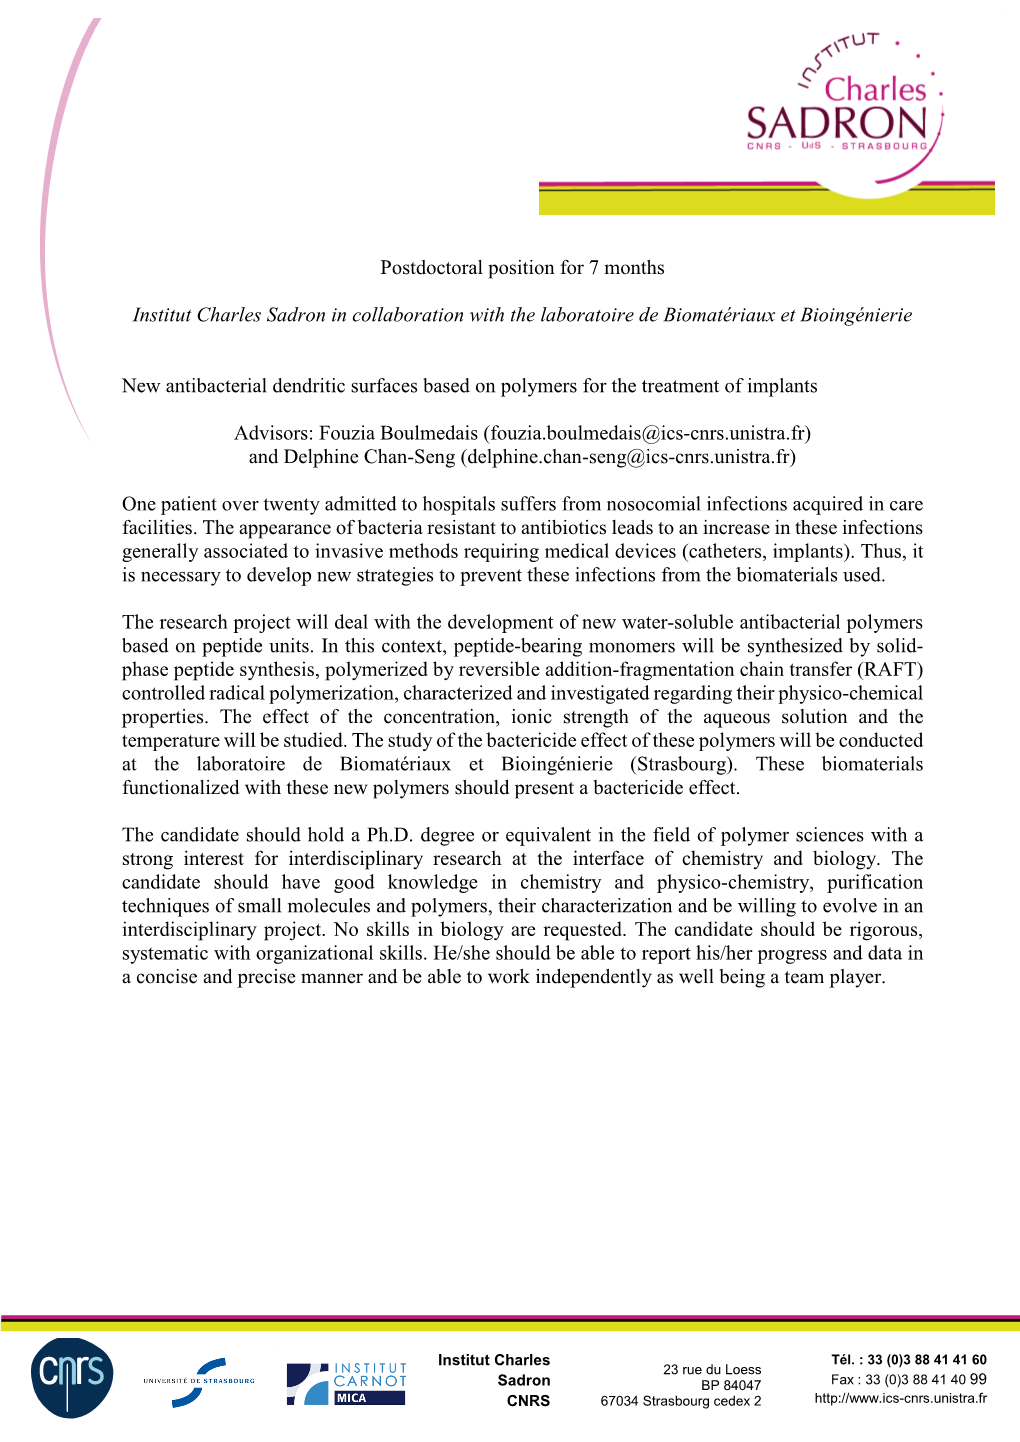 Postdoctoral Position for 7 Months Institut Charles Sadron In